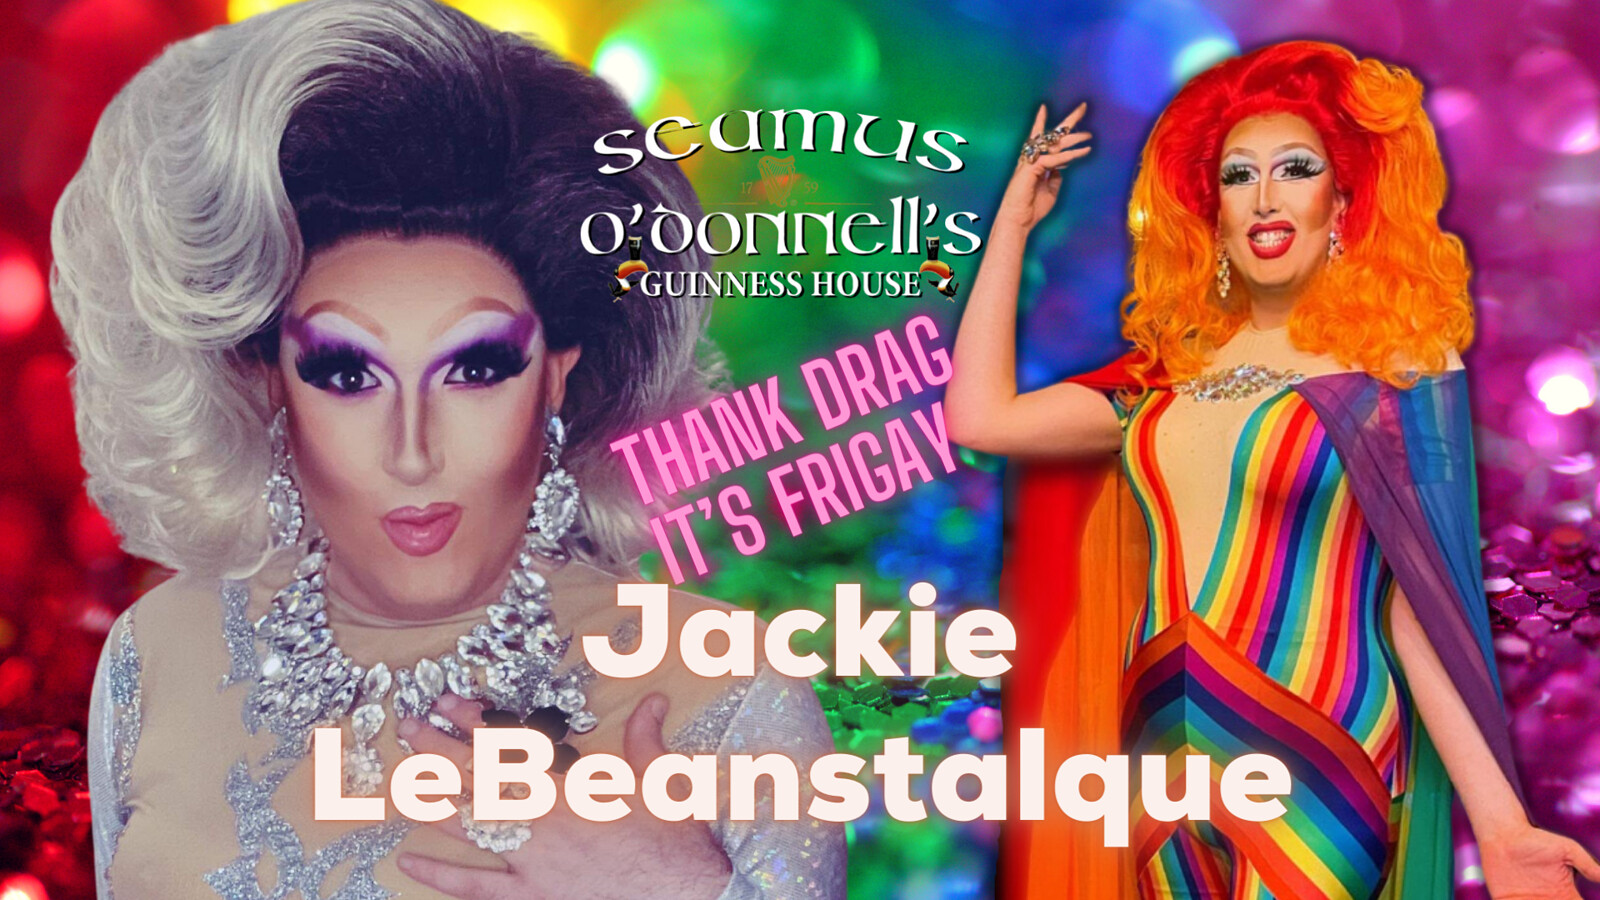 Thank Drag it's FriGay with Jackie LeBeanstalque at Seamus O'Donnell's